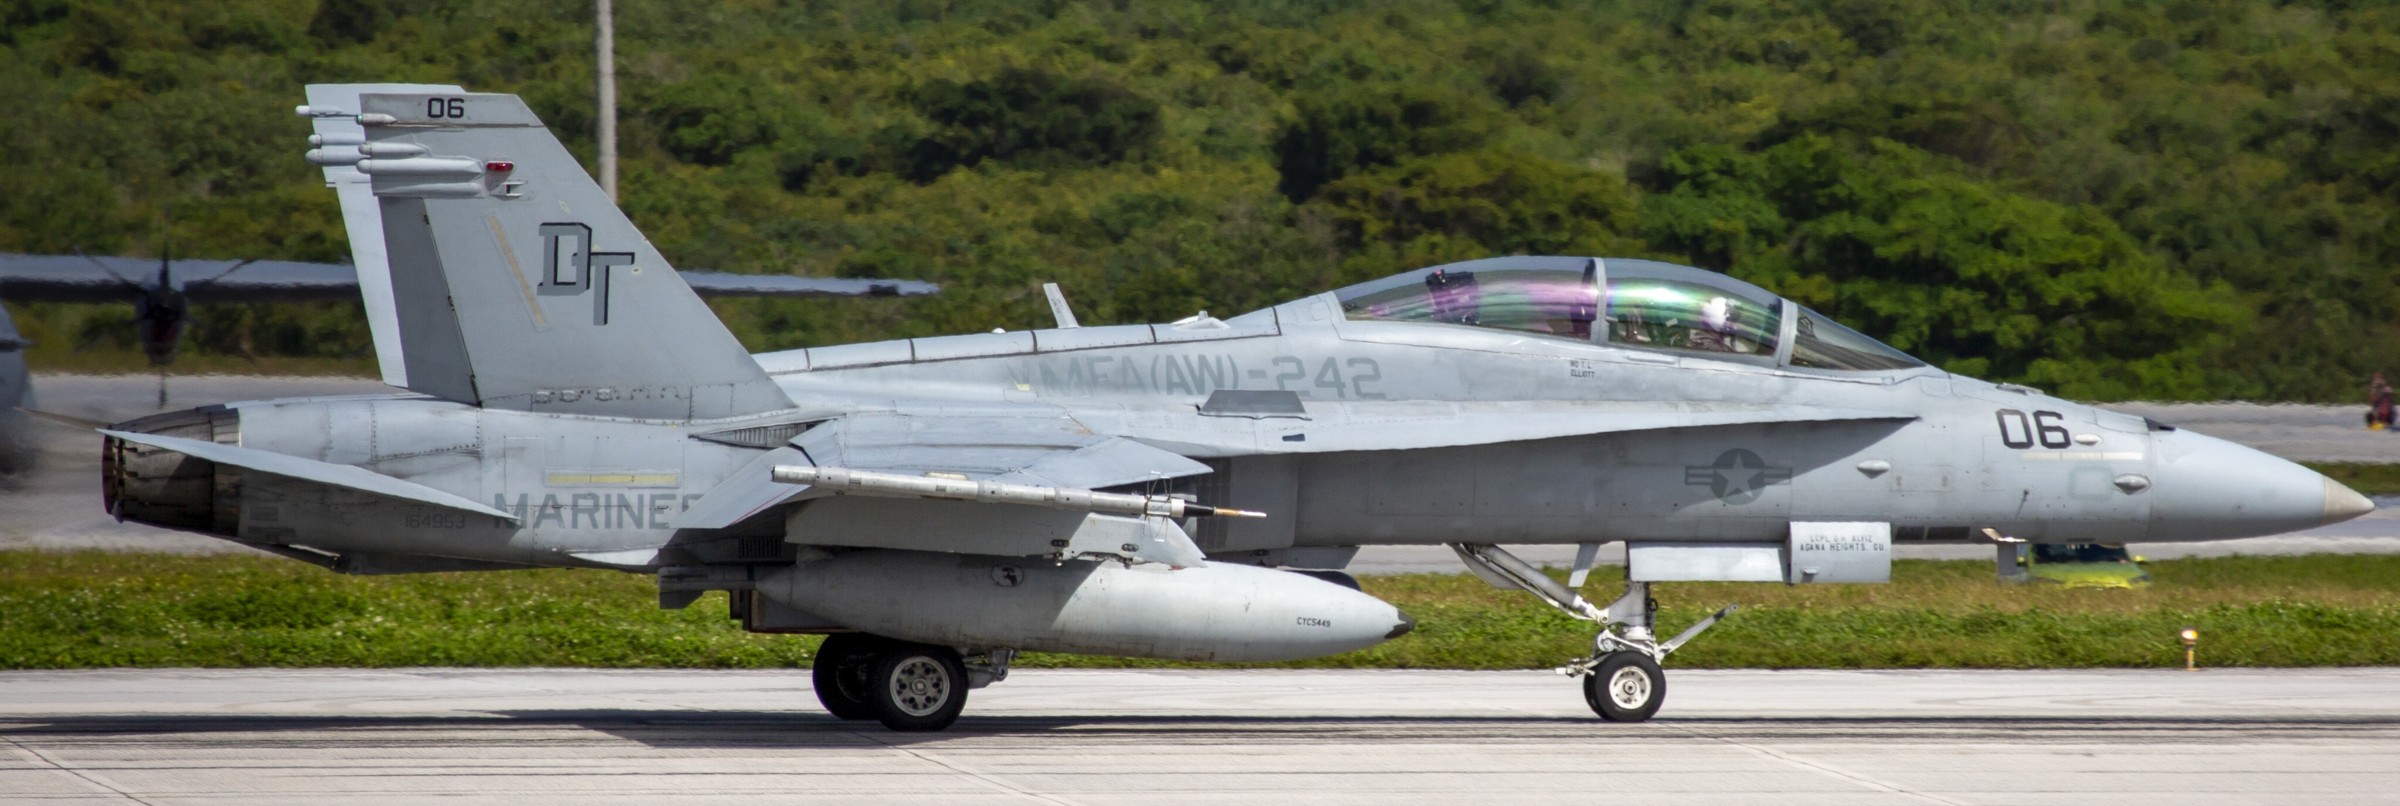 vmfa(aw)-242 bats marine all-weather fighter attack squadron usmc f/a-18d hornet 89 exercise cope north andersen afb guam